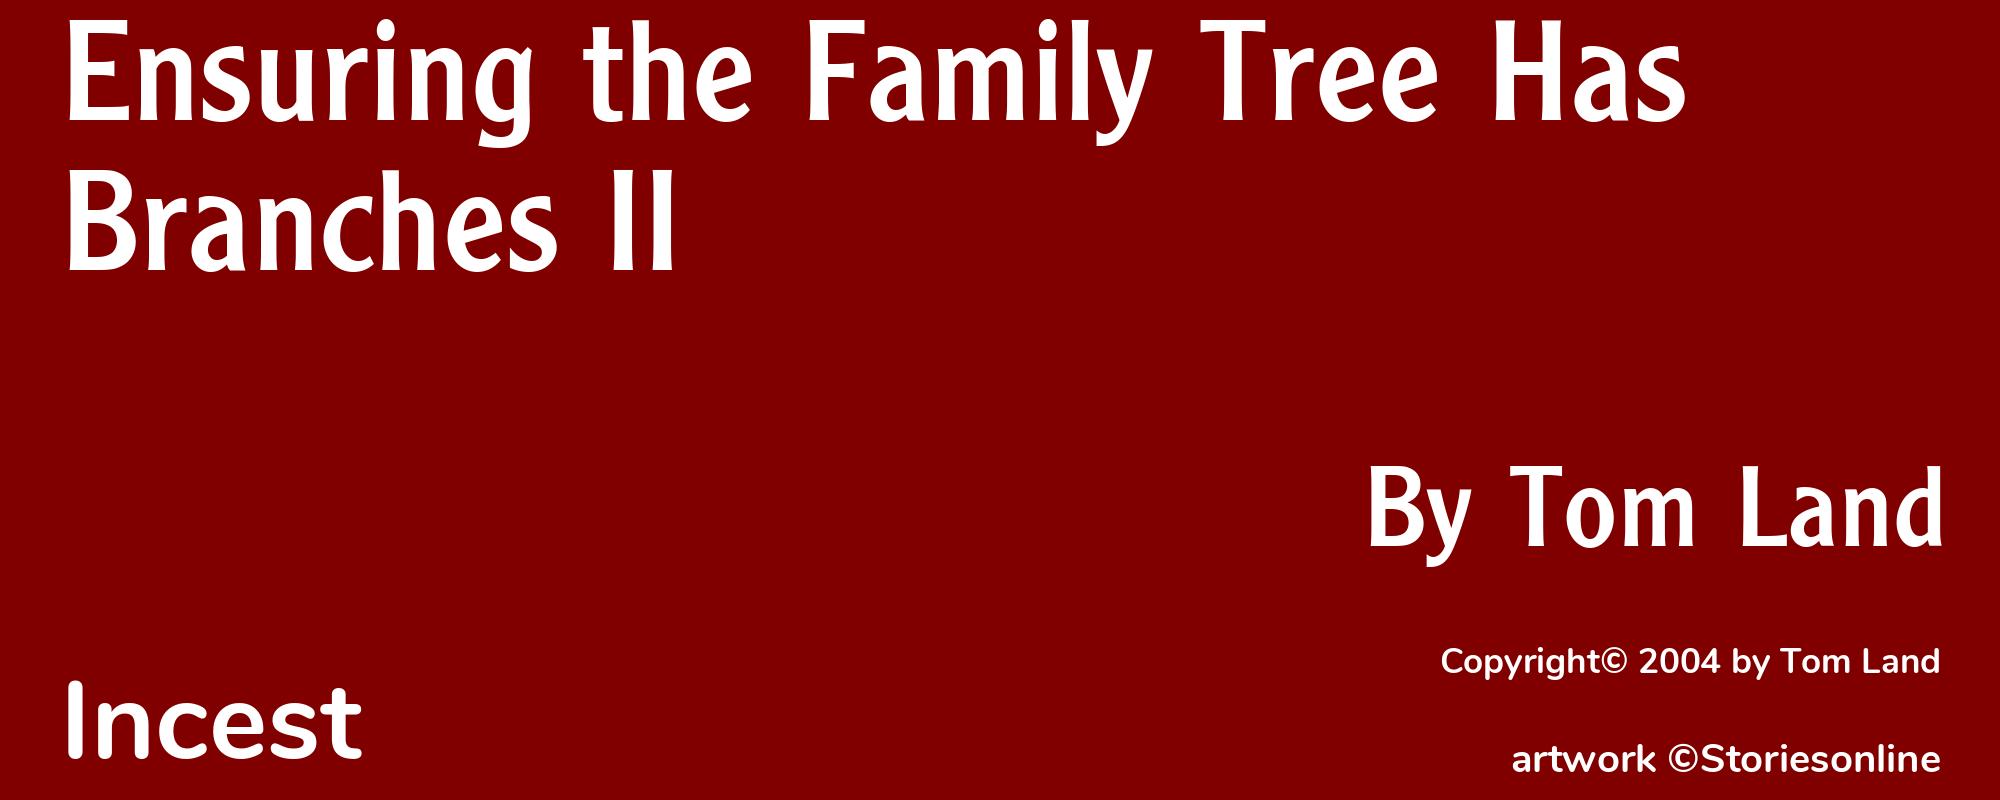 Ensuring the Family Tree Has Branches II - Cover